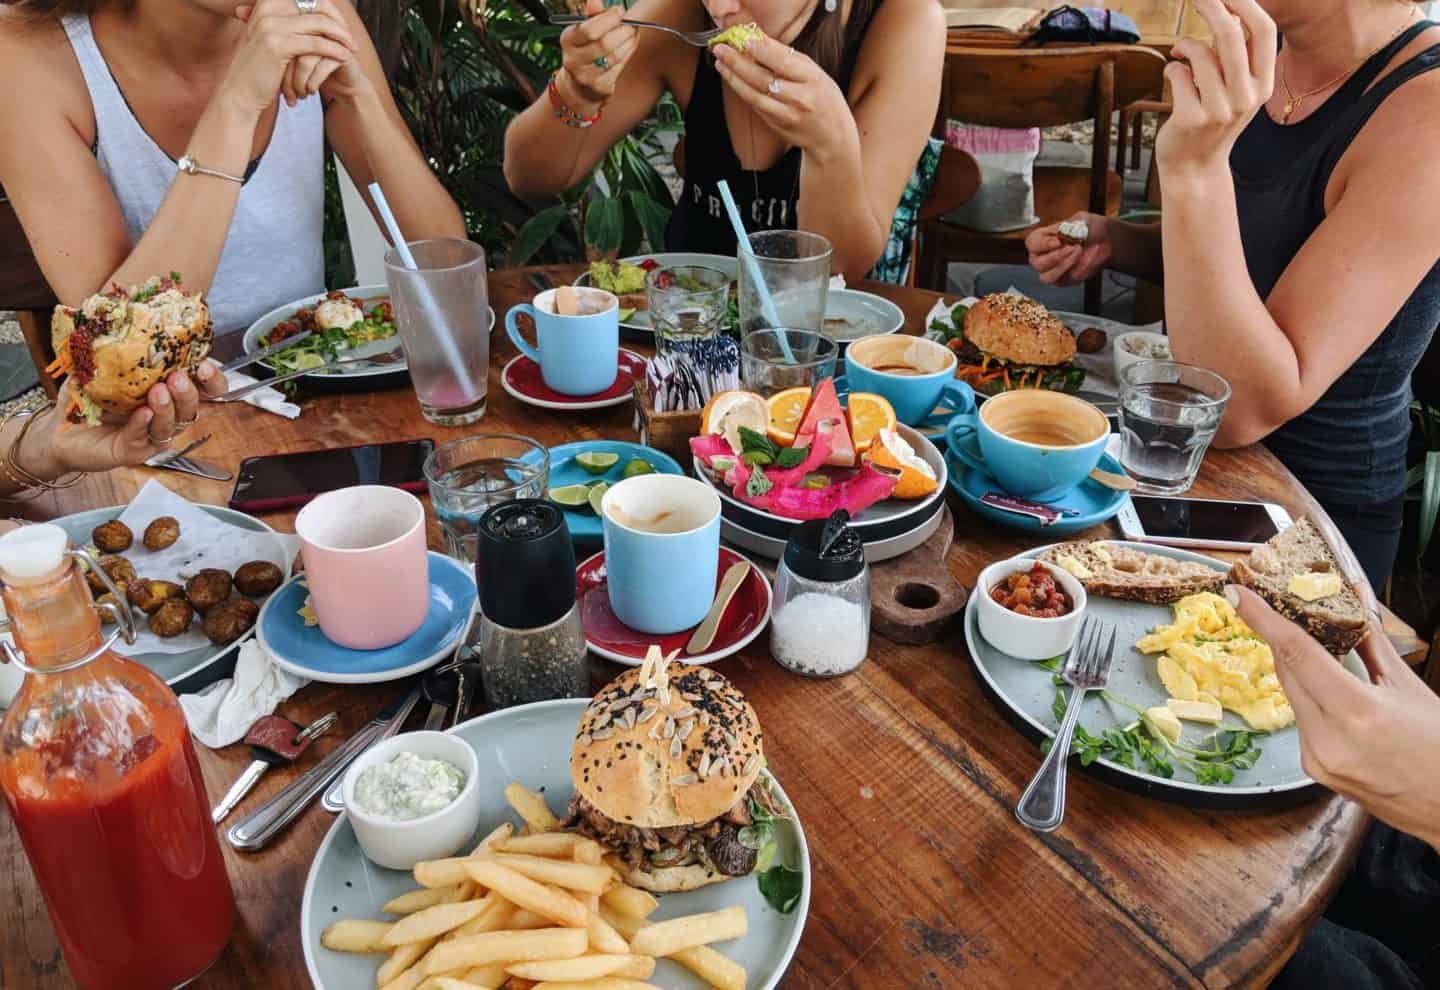 Shady Shack best cafes in Bali